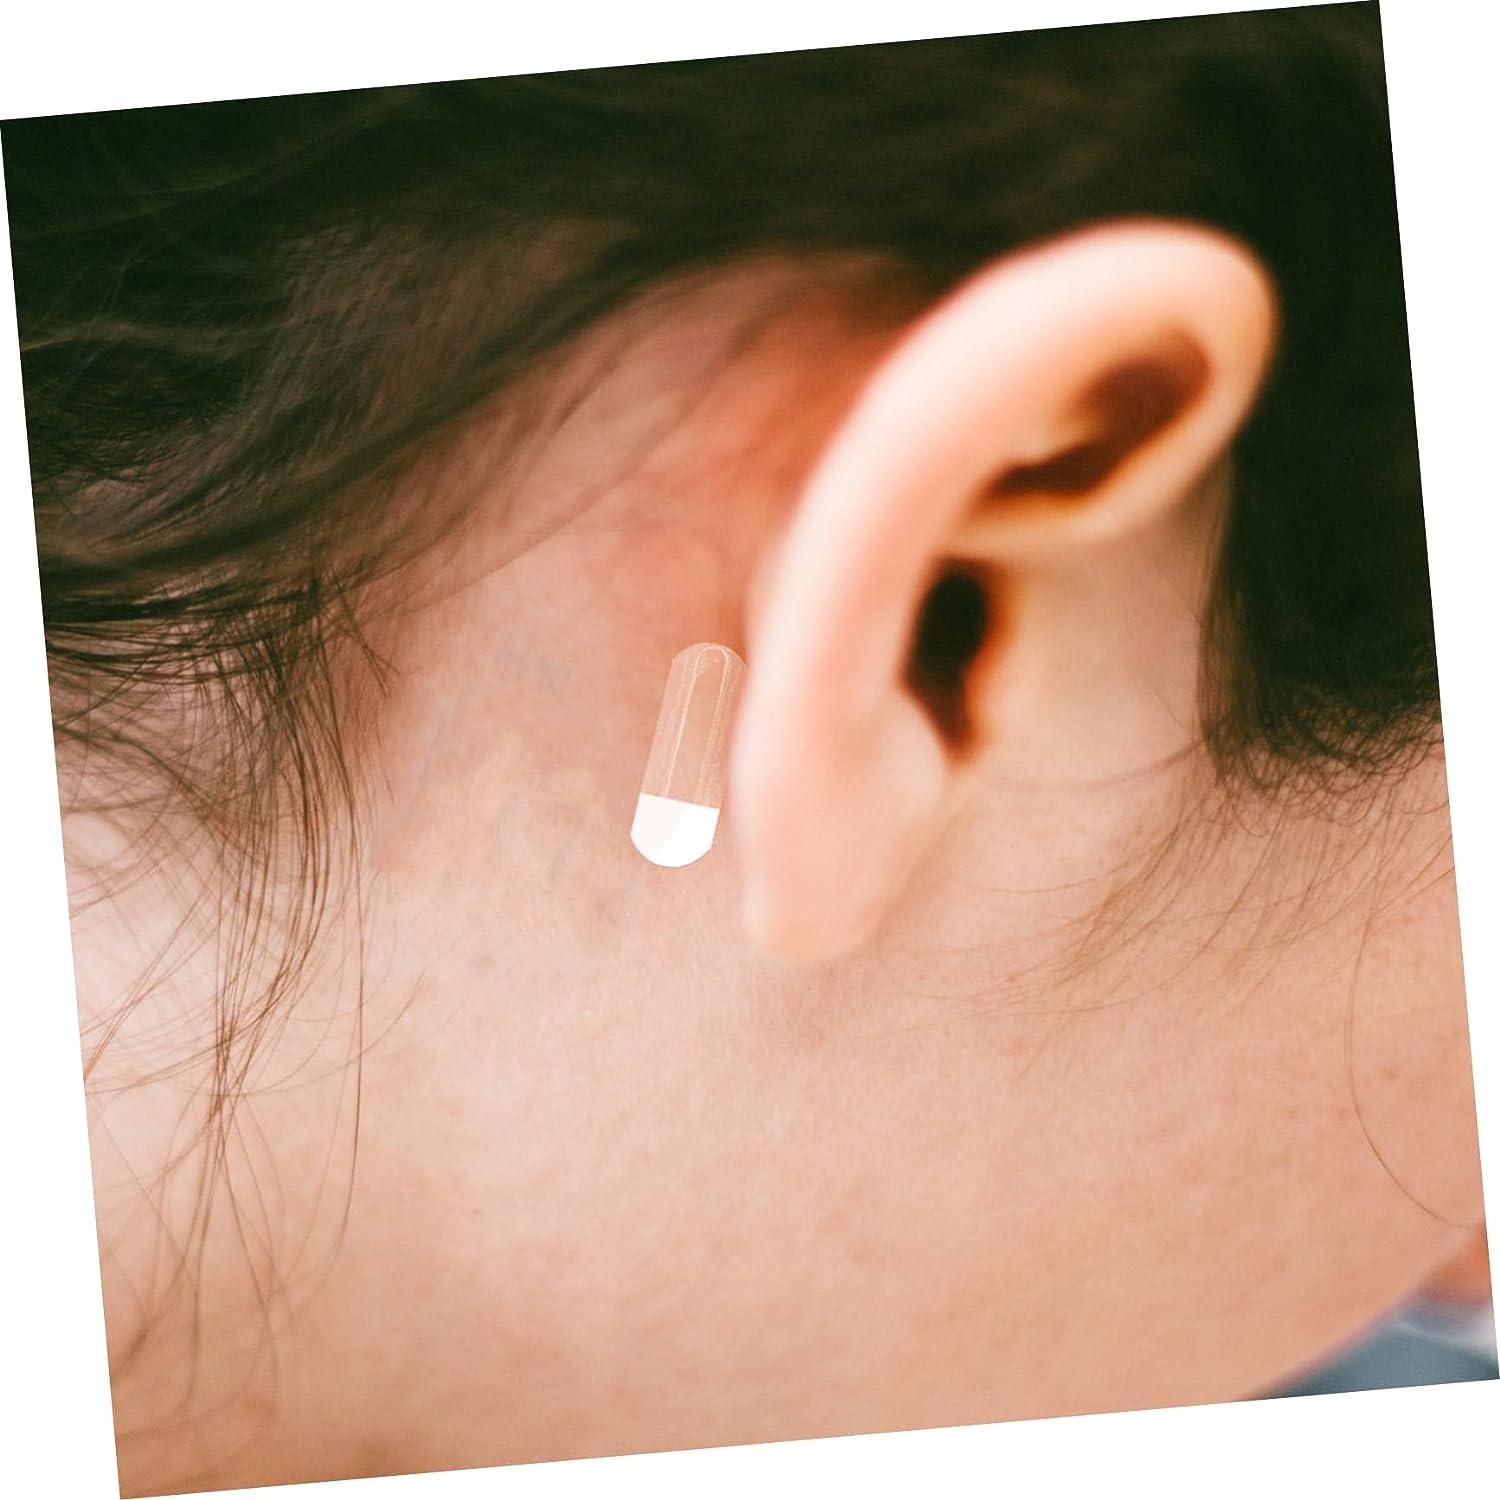  EarFix Ear Corrector – 8-Pack Ear Stickers to Hold